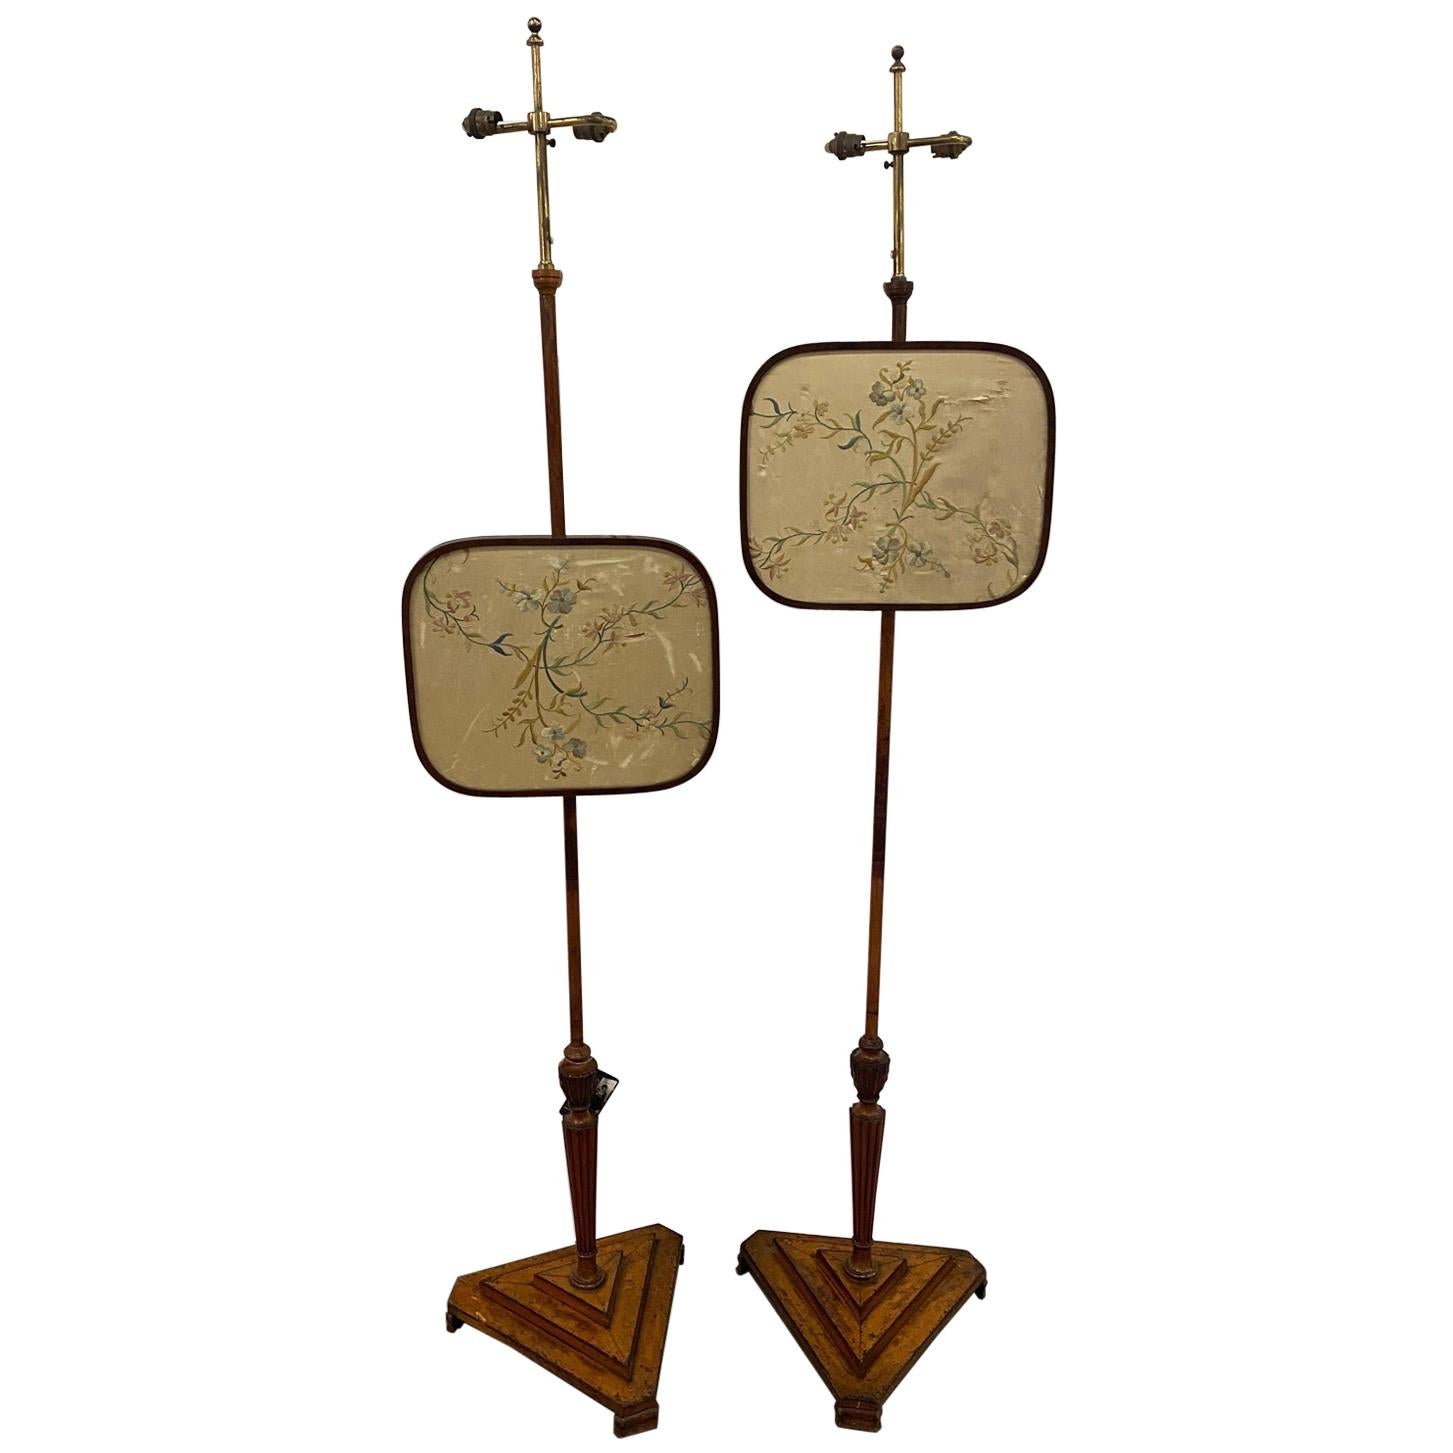 Pair of 18th-19th Century English Chippendale Pole Screens Made into Floor Lamps